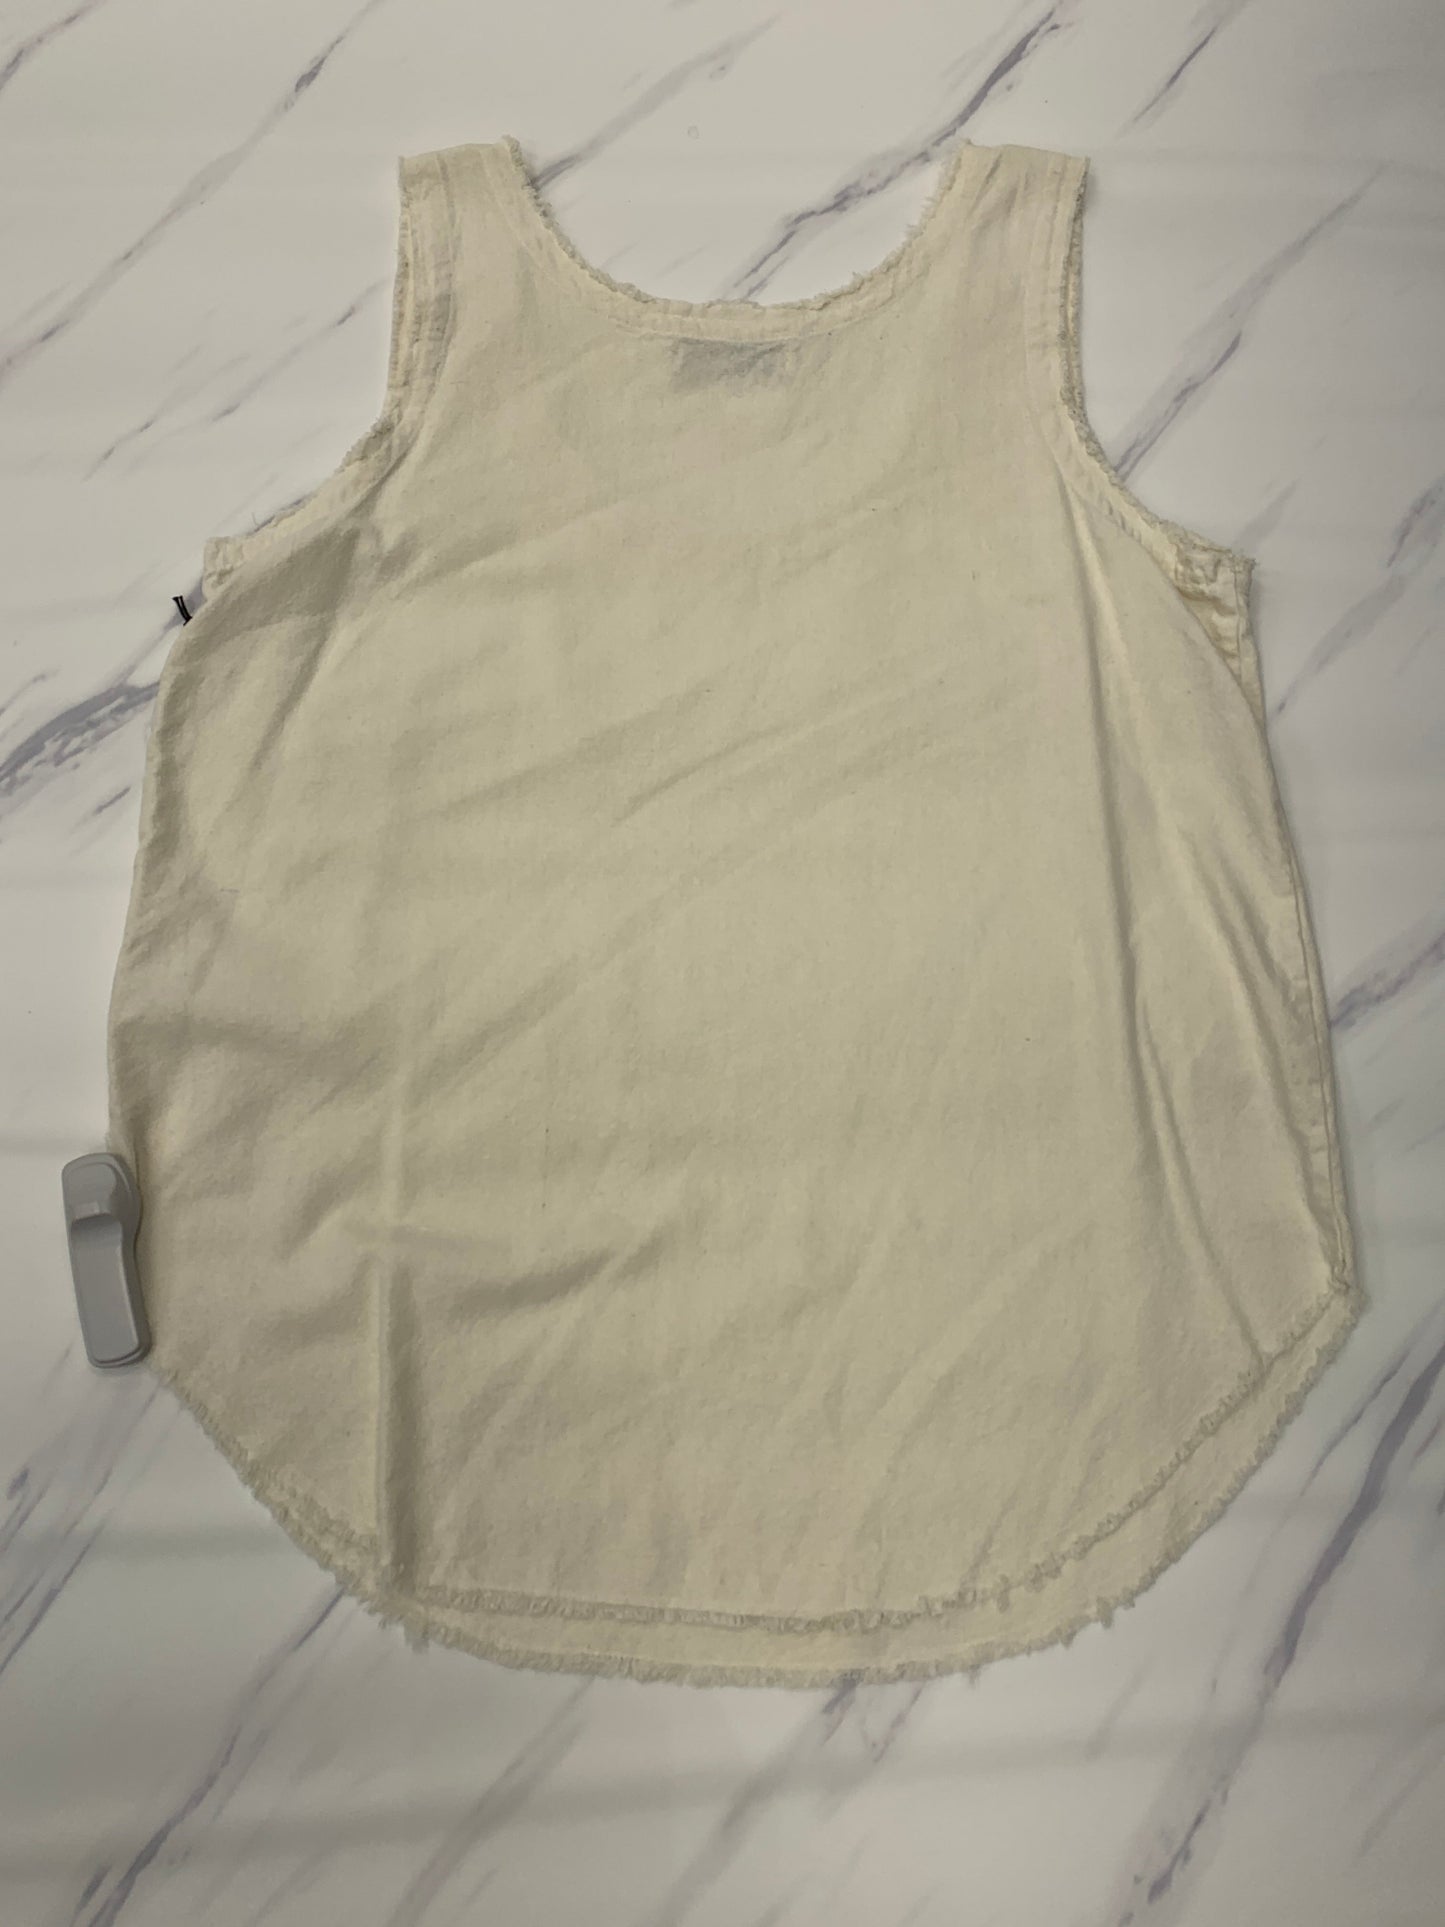 Top Sleeveless Bailey 44, Size L